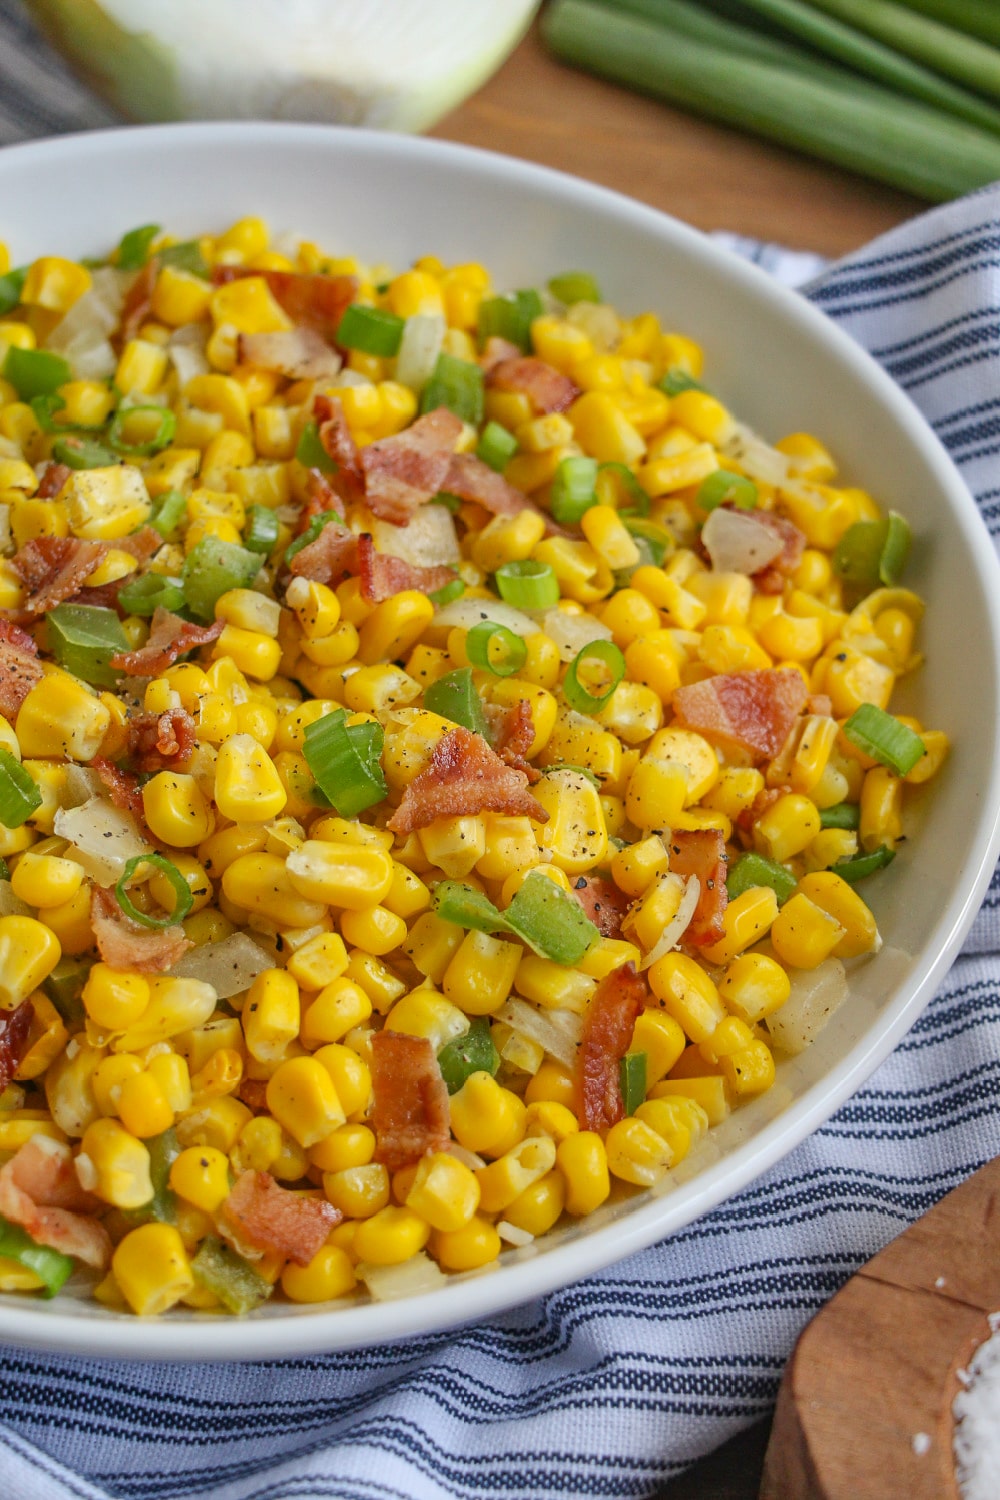 Fried corn, onions, bell peppers and bacon in a white bowl on a wood cutting board.